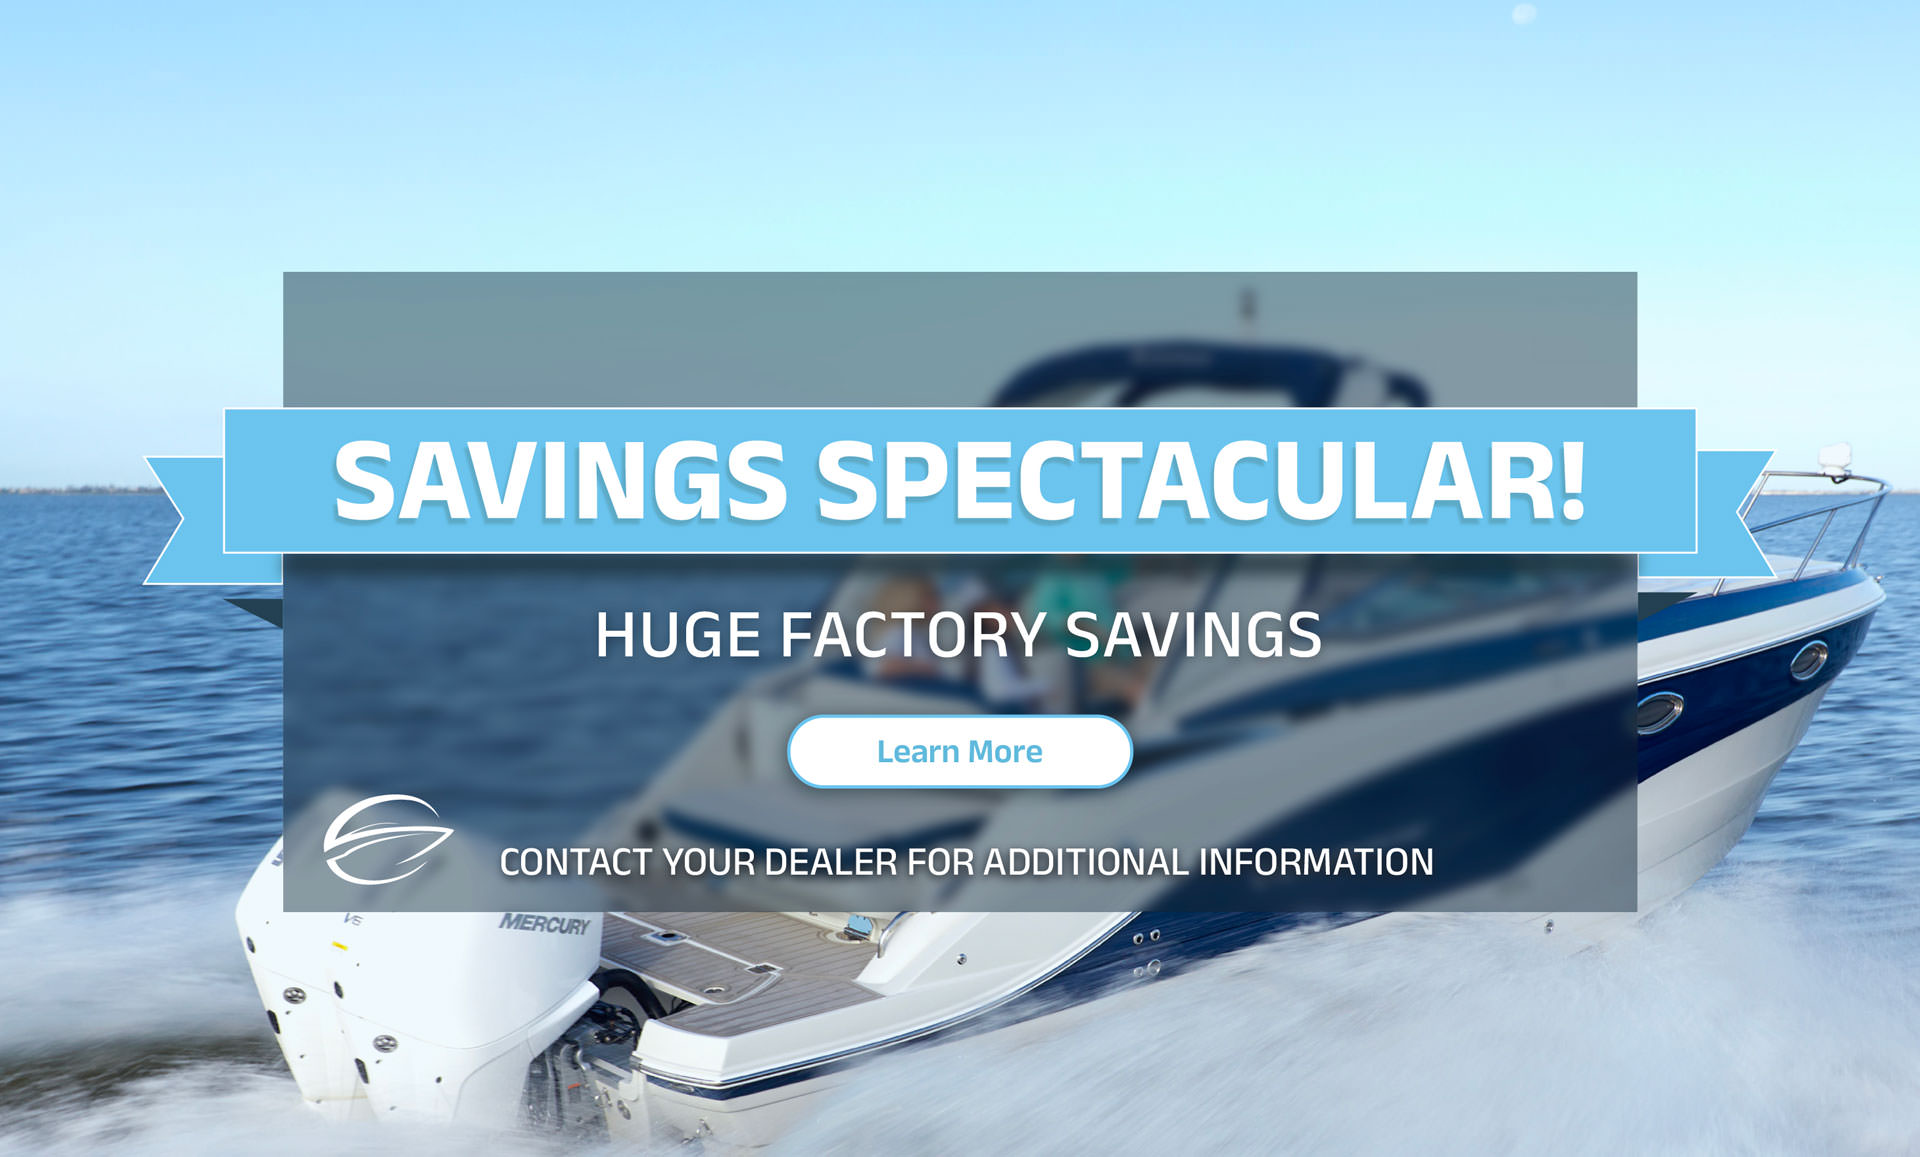 Savings Spectacular! Huge Factory Savings. Learn More. Contact Your Dealer For Additional Information.